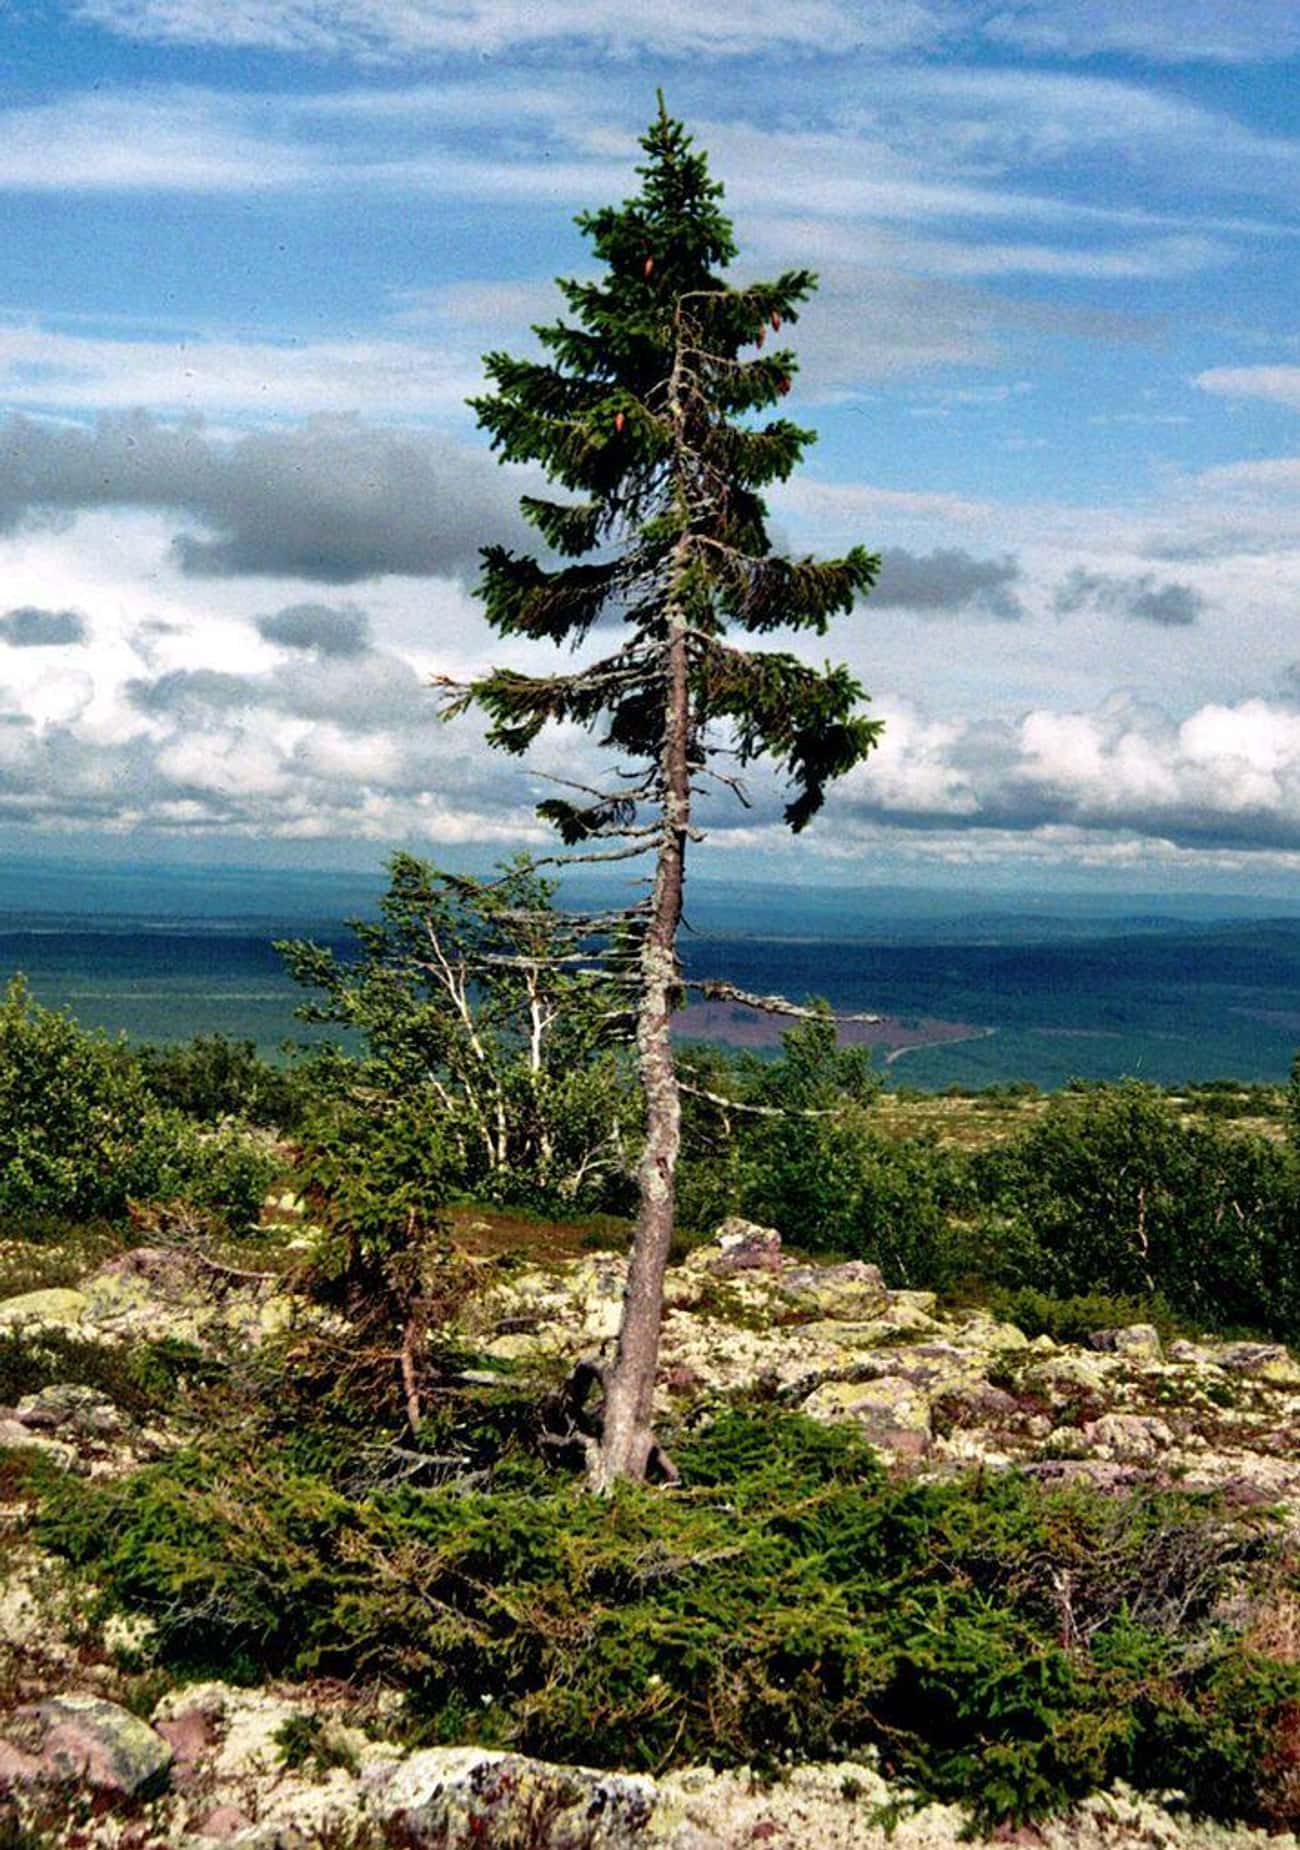 Old Tjikko, A 9,560-Year-Old Norway Spruce